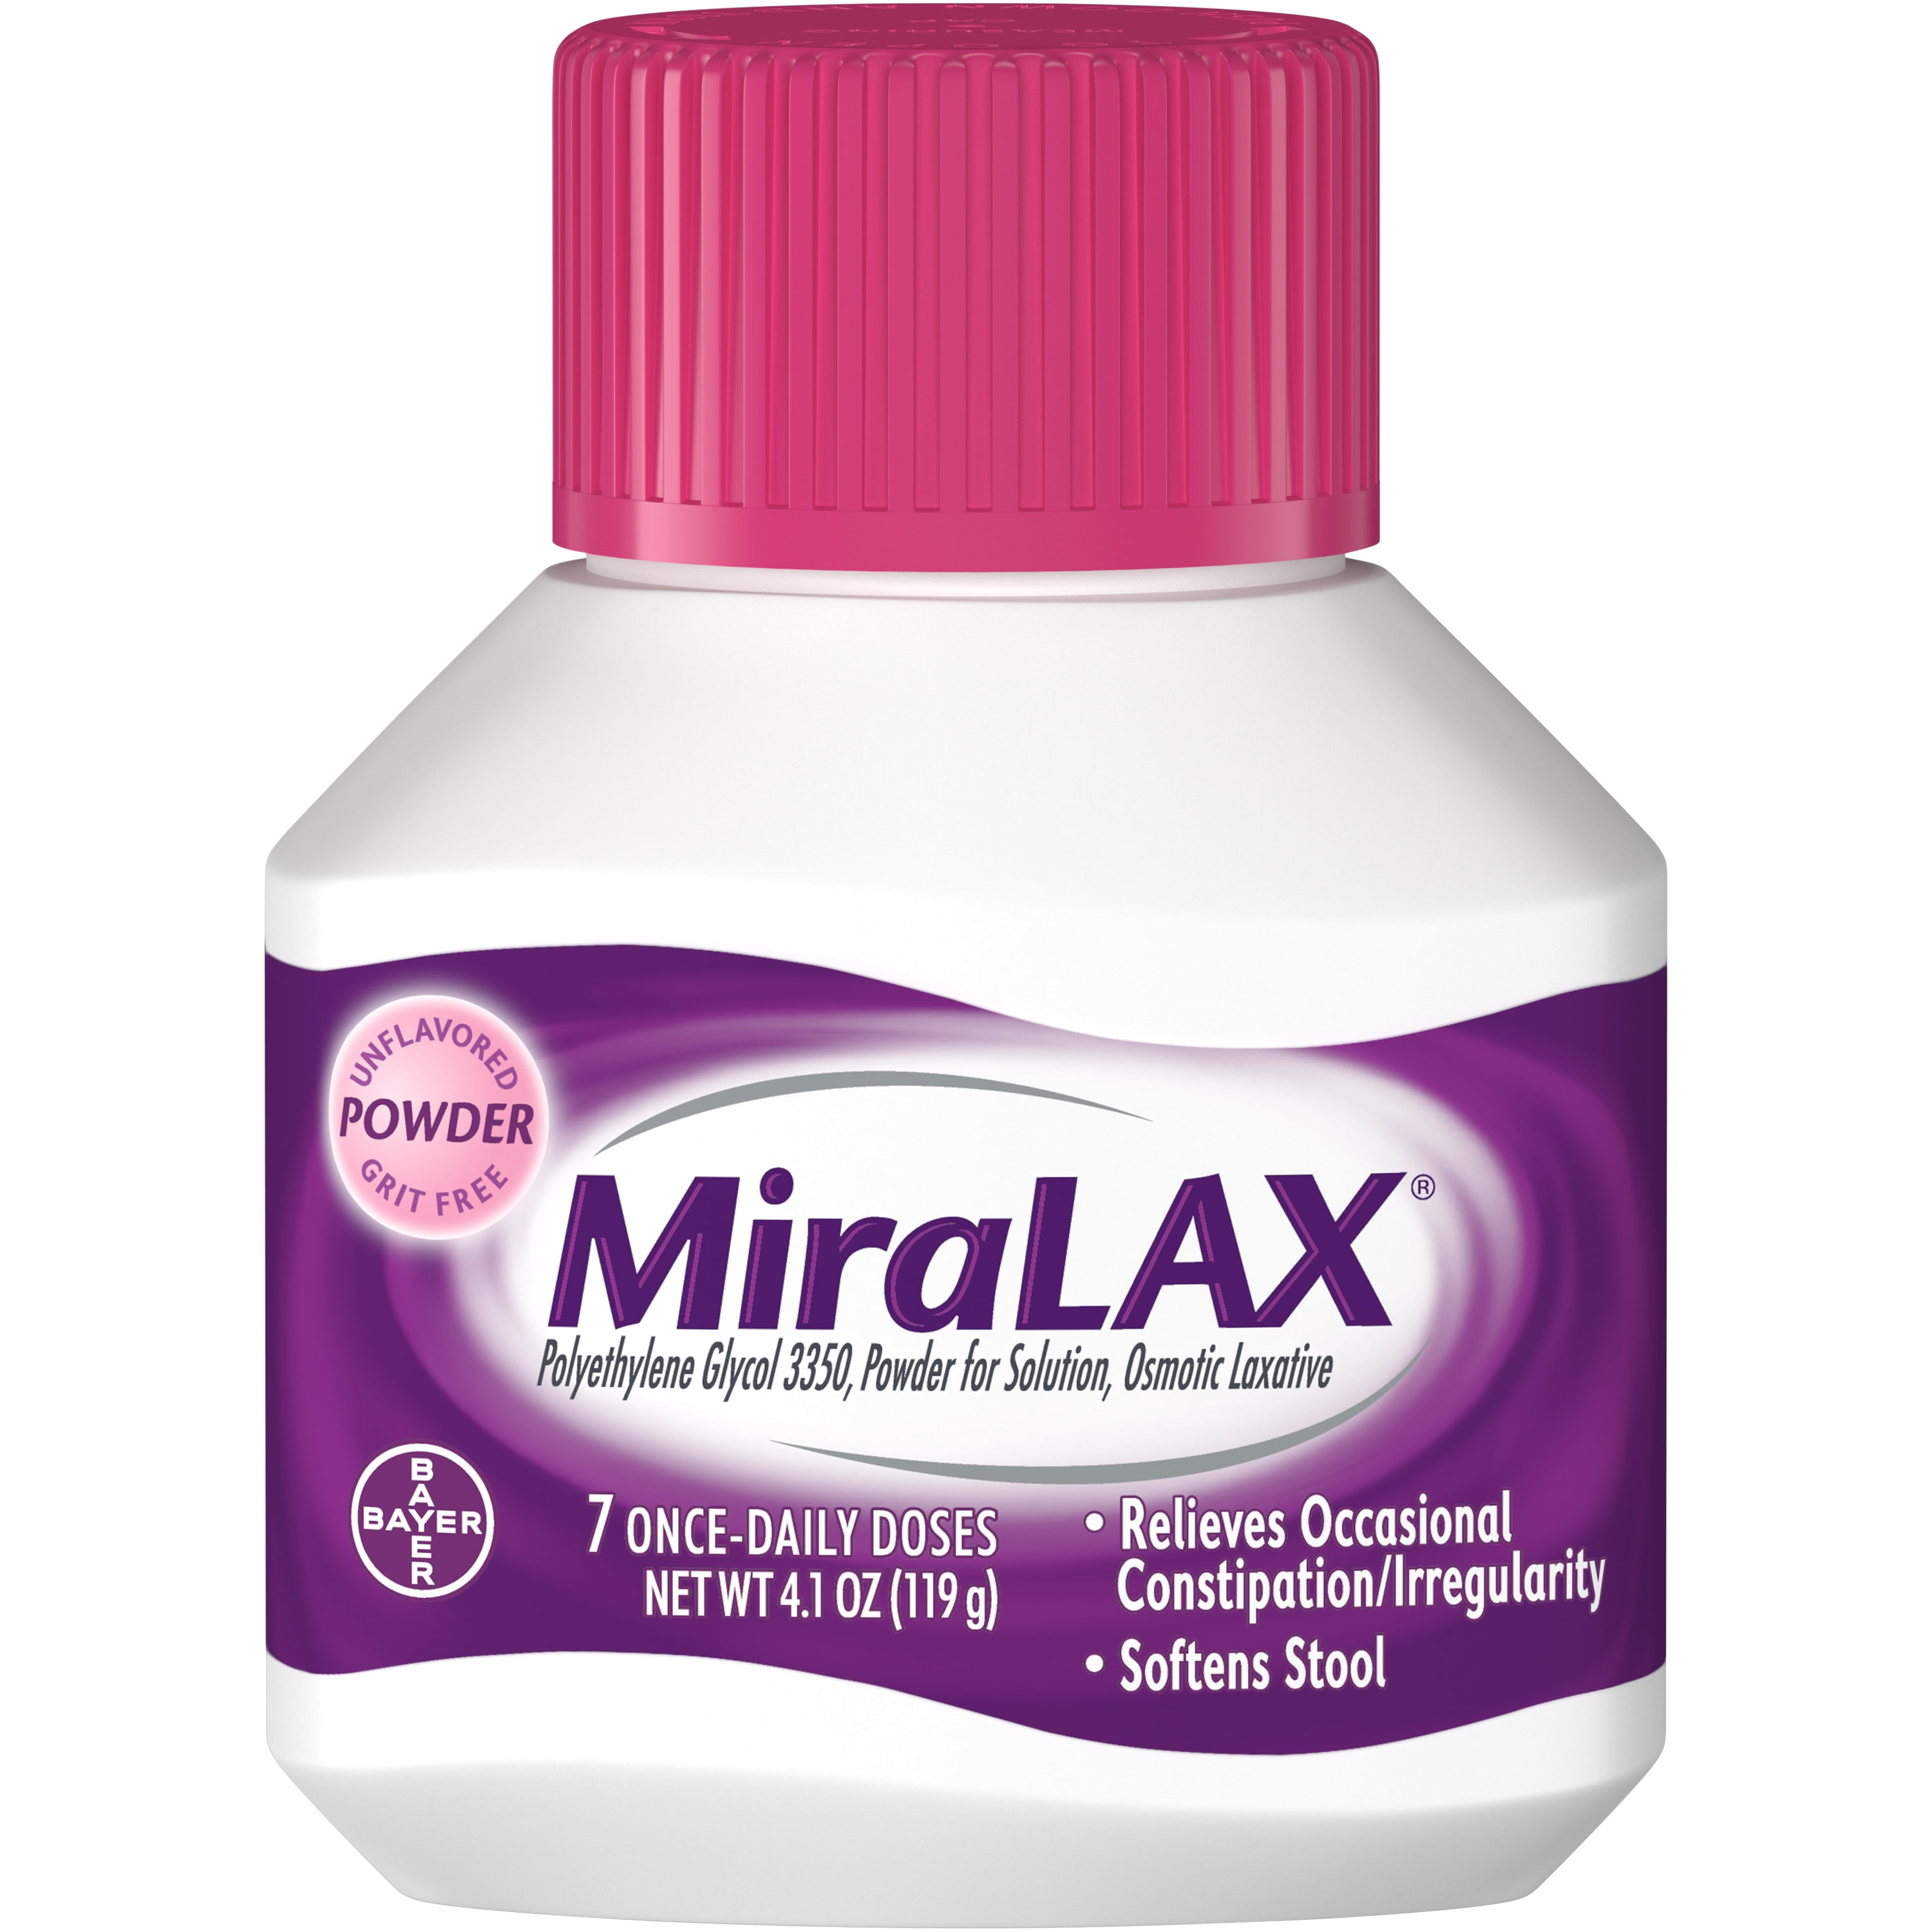 MiraLAX Laxative Powder for Gentle Constipation Relief, Stool Softener, 7 Doses